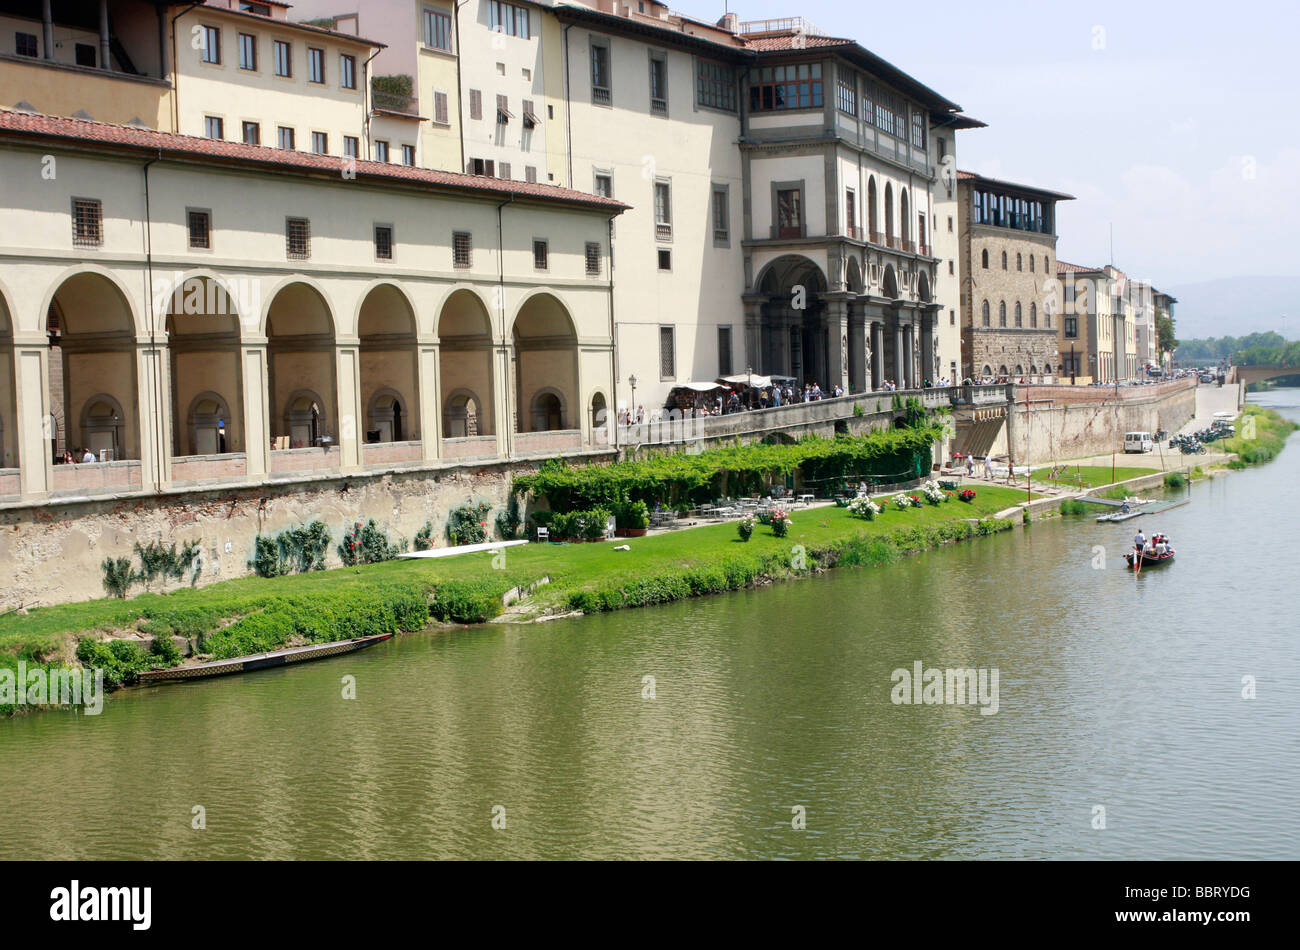 Part of the Vasari Corridor along the banks of the Arno River which connects the Uffizi with the Pitti Palace in Florence Stock Photo